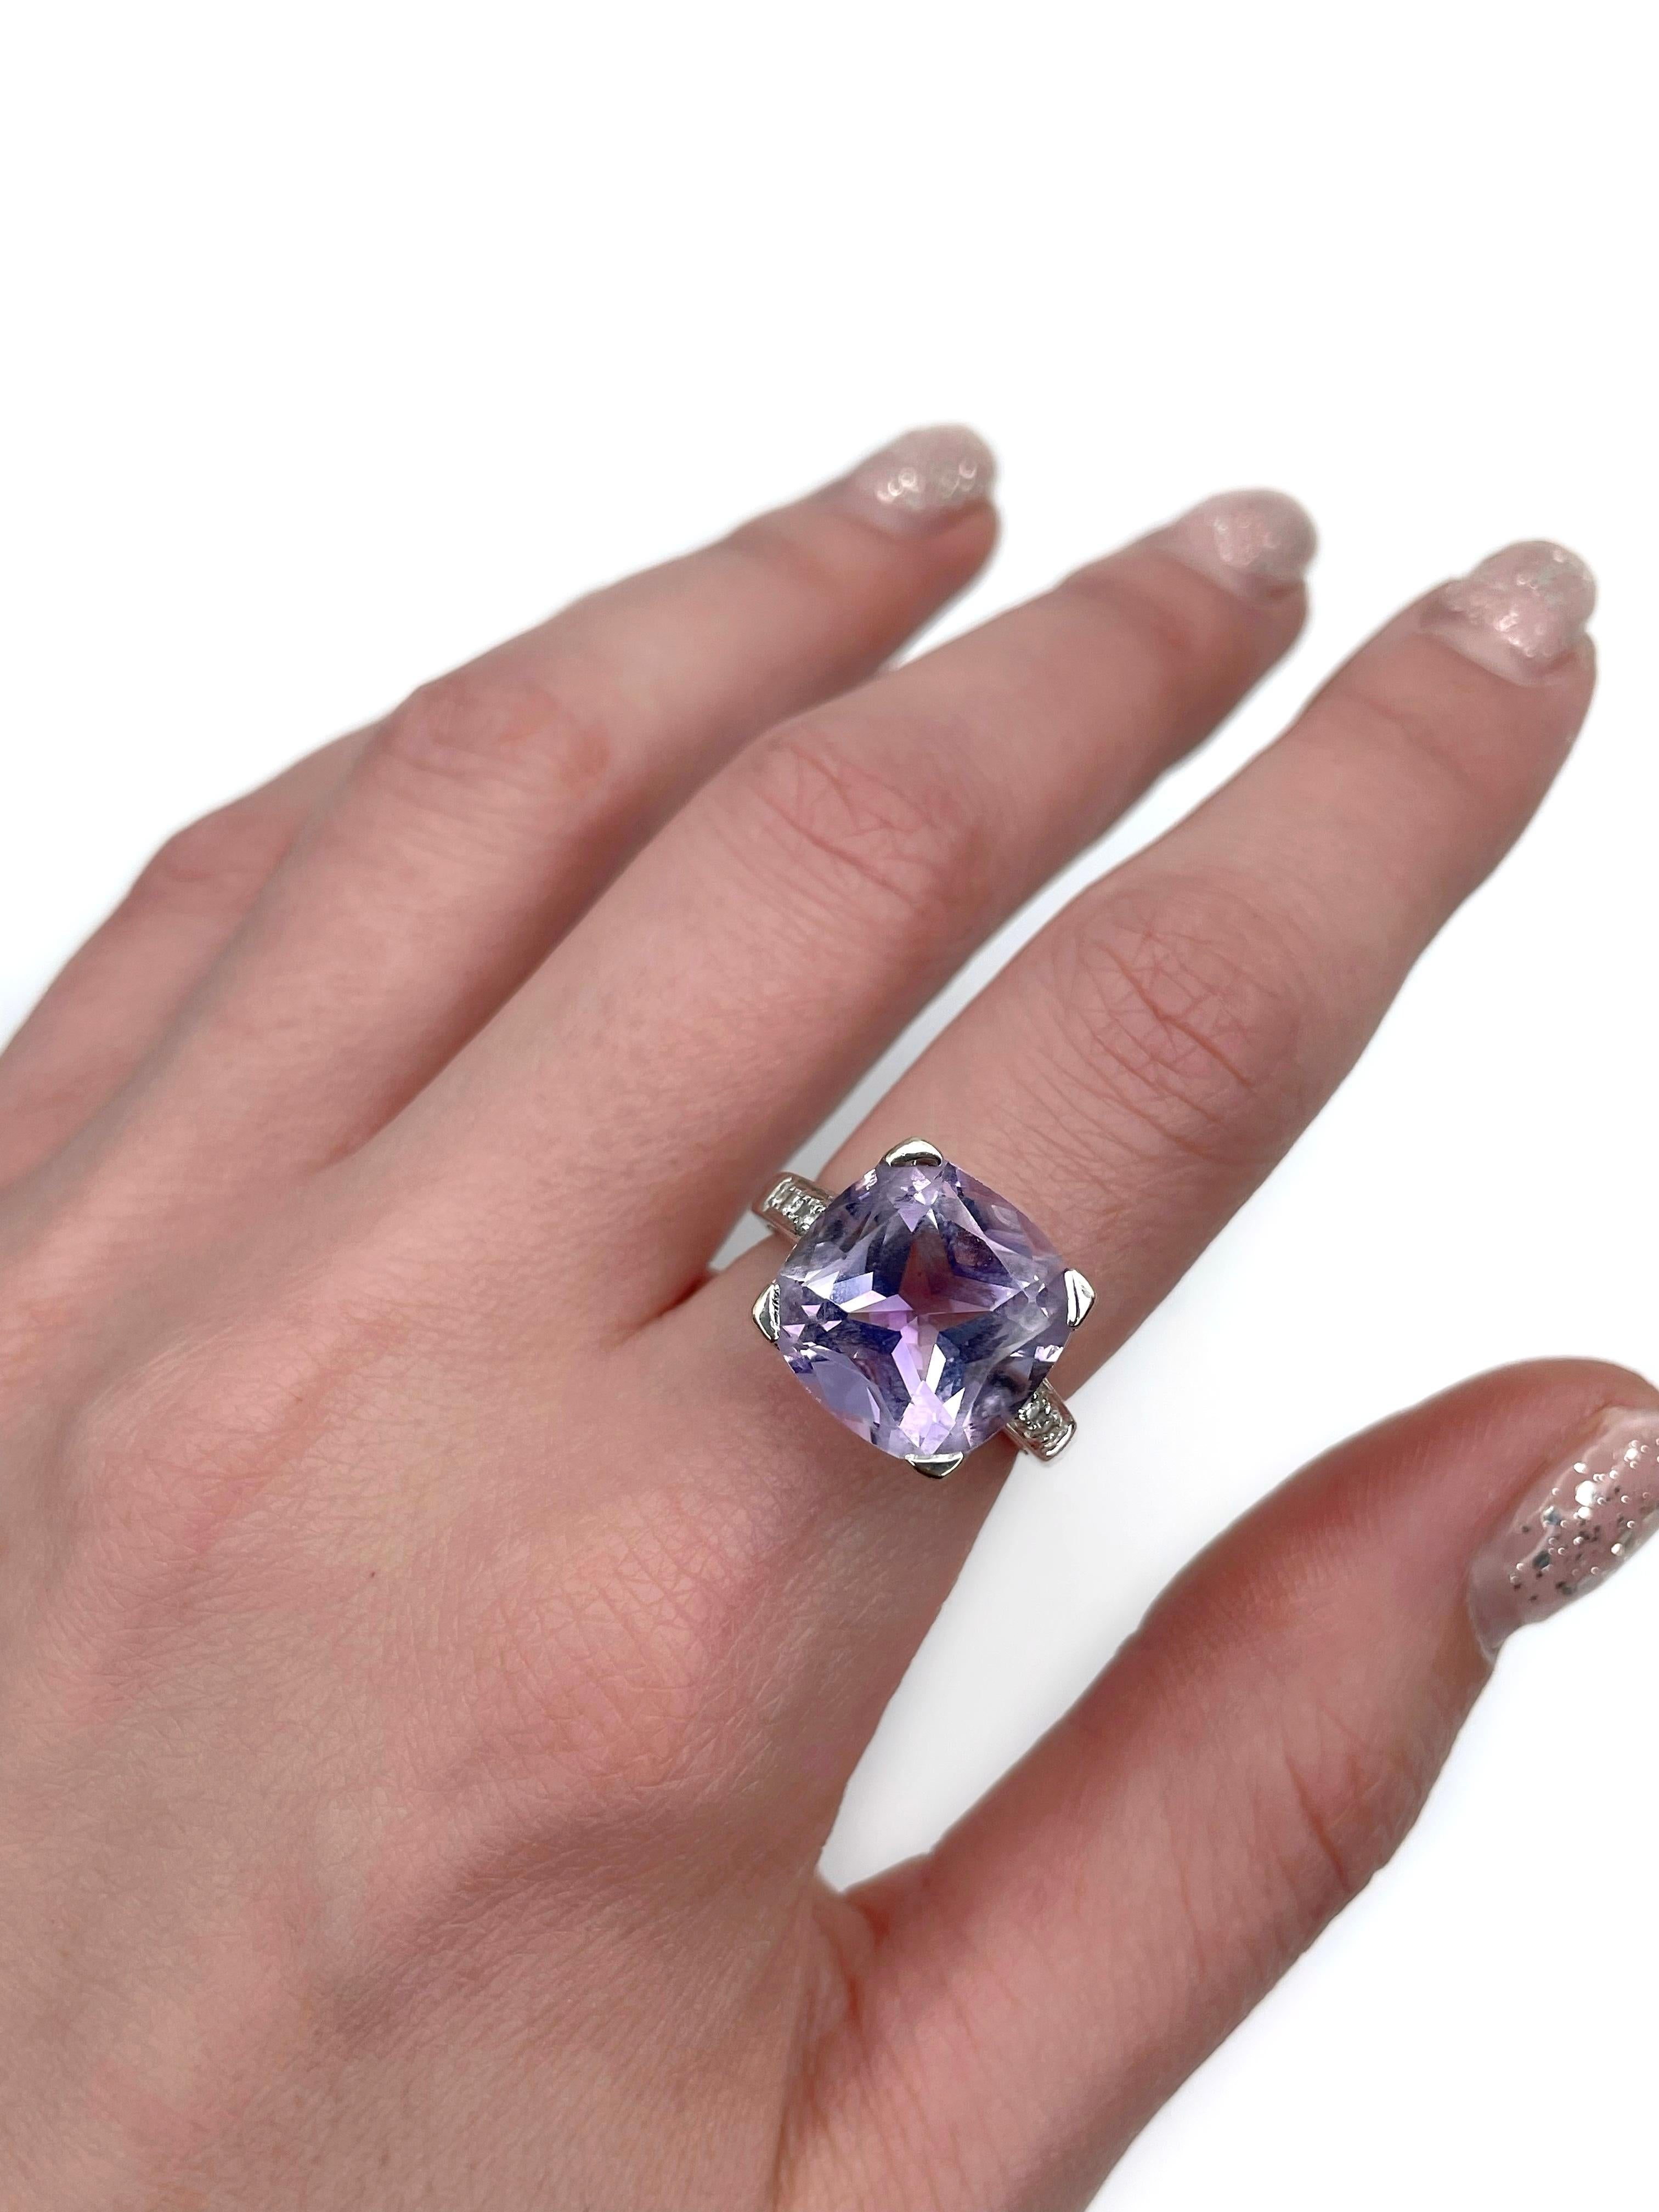 This is an amazing cocktail ring designed by Mauboussin for the “Gueule d’Amour” collection. Circa 2010. 

It is crafted in 18K white gold. The piece features a beautiful colour amethyst (Rose de France) at the center: 10.00ct, bP 3/3, VS. The gem